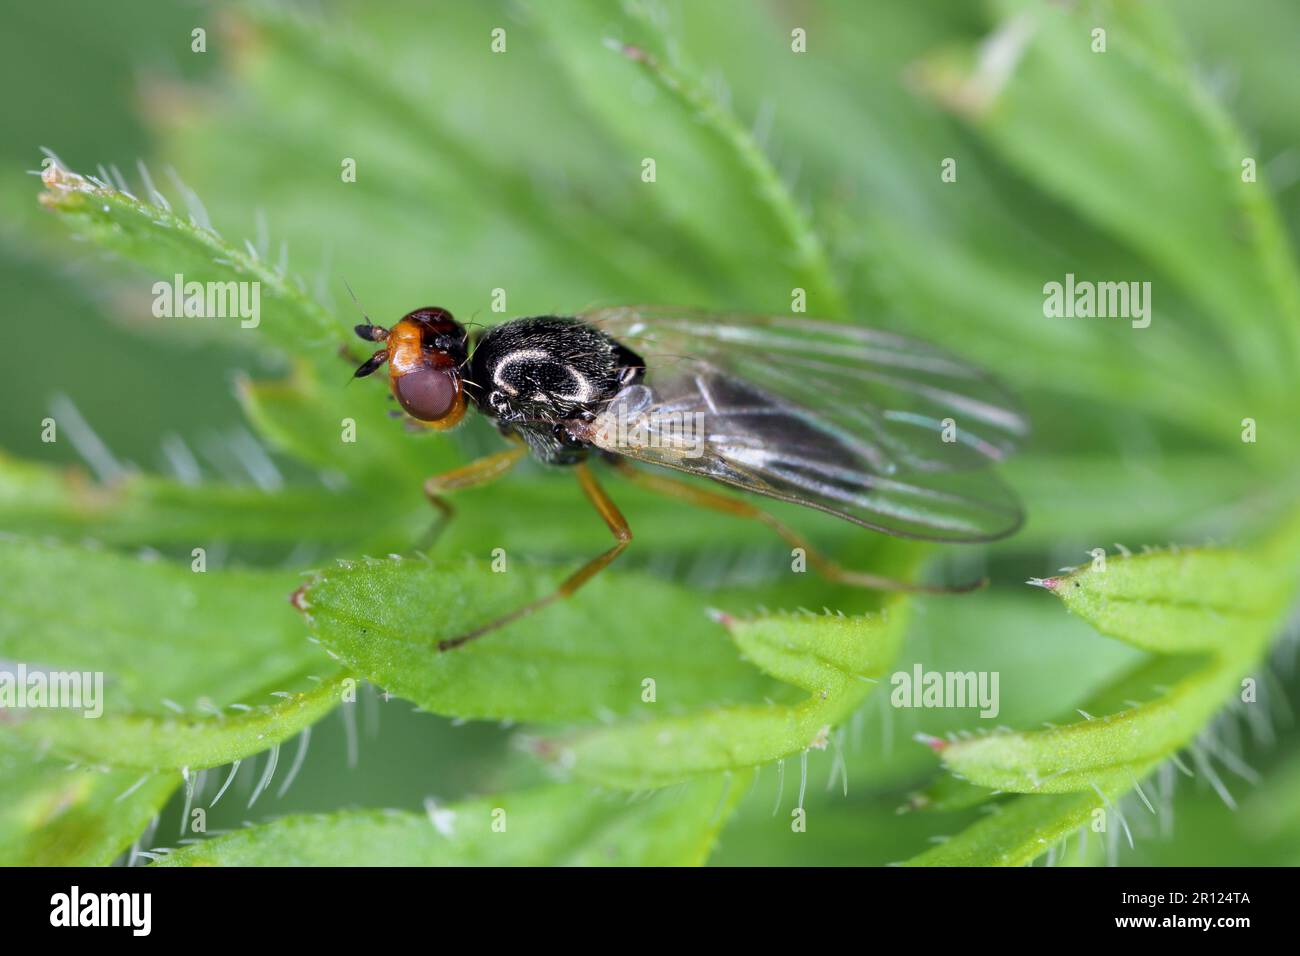 Carrot root fly, Chamaepsila rosae called also Psila rosa. Adult insect on carrot foliage. Stock Photo